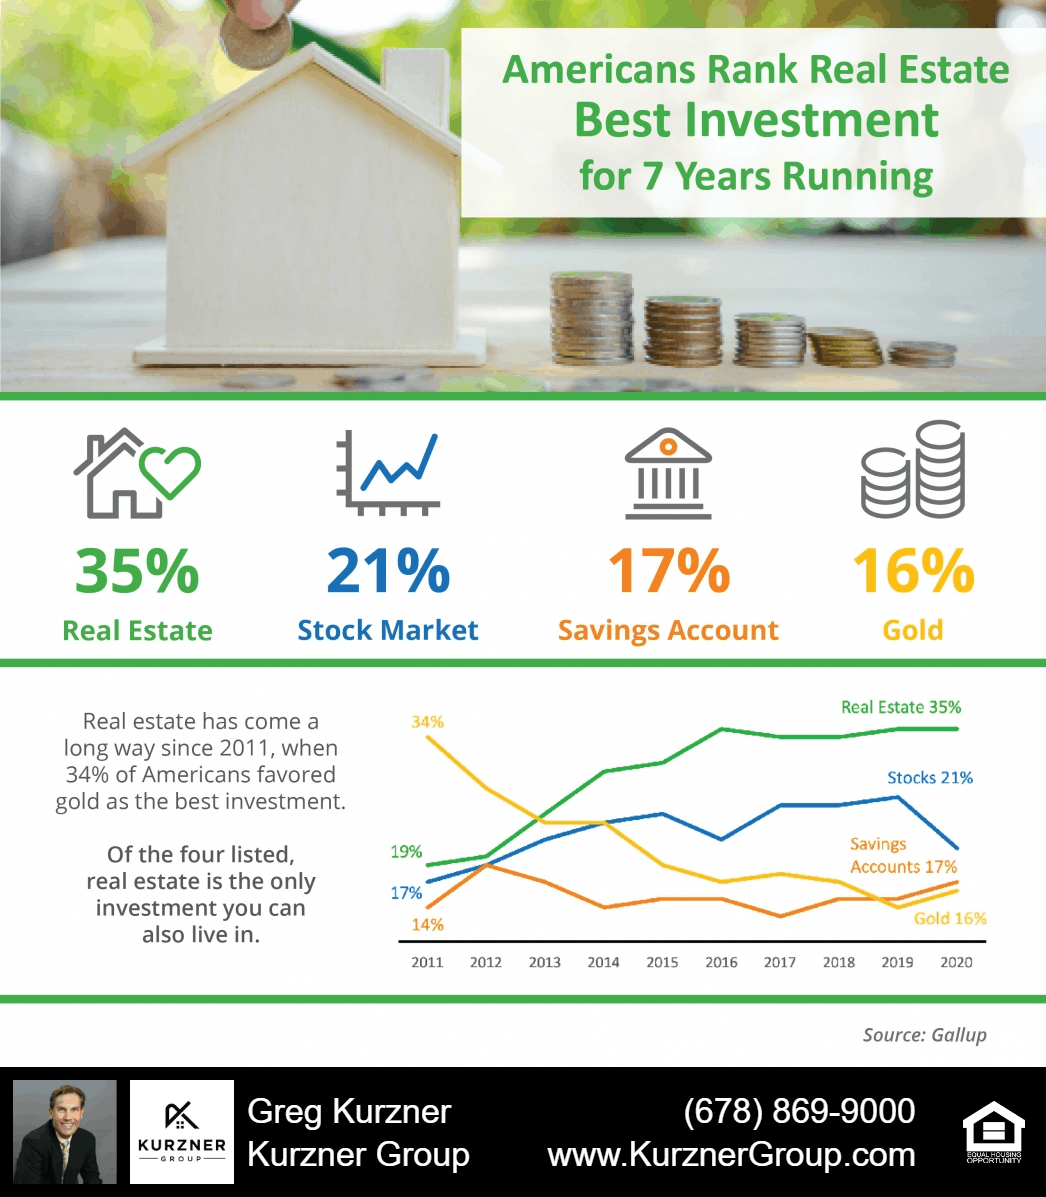 Americans Rank Real Estate Best Investment for 7 Years Running [INFOGRAPHIC]